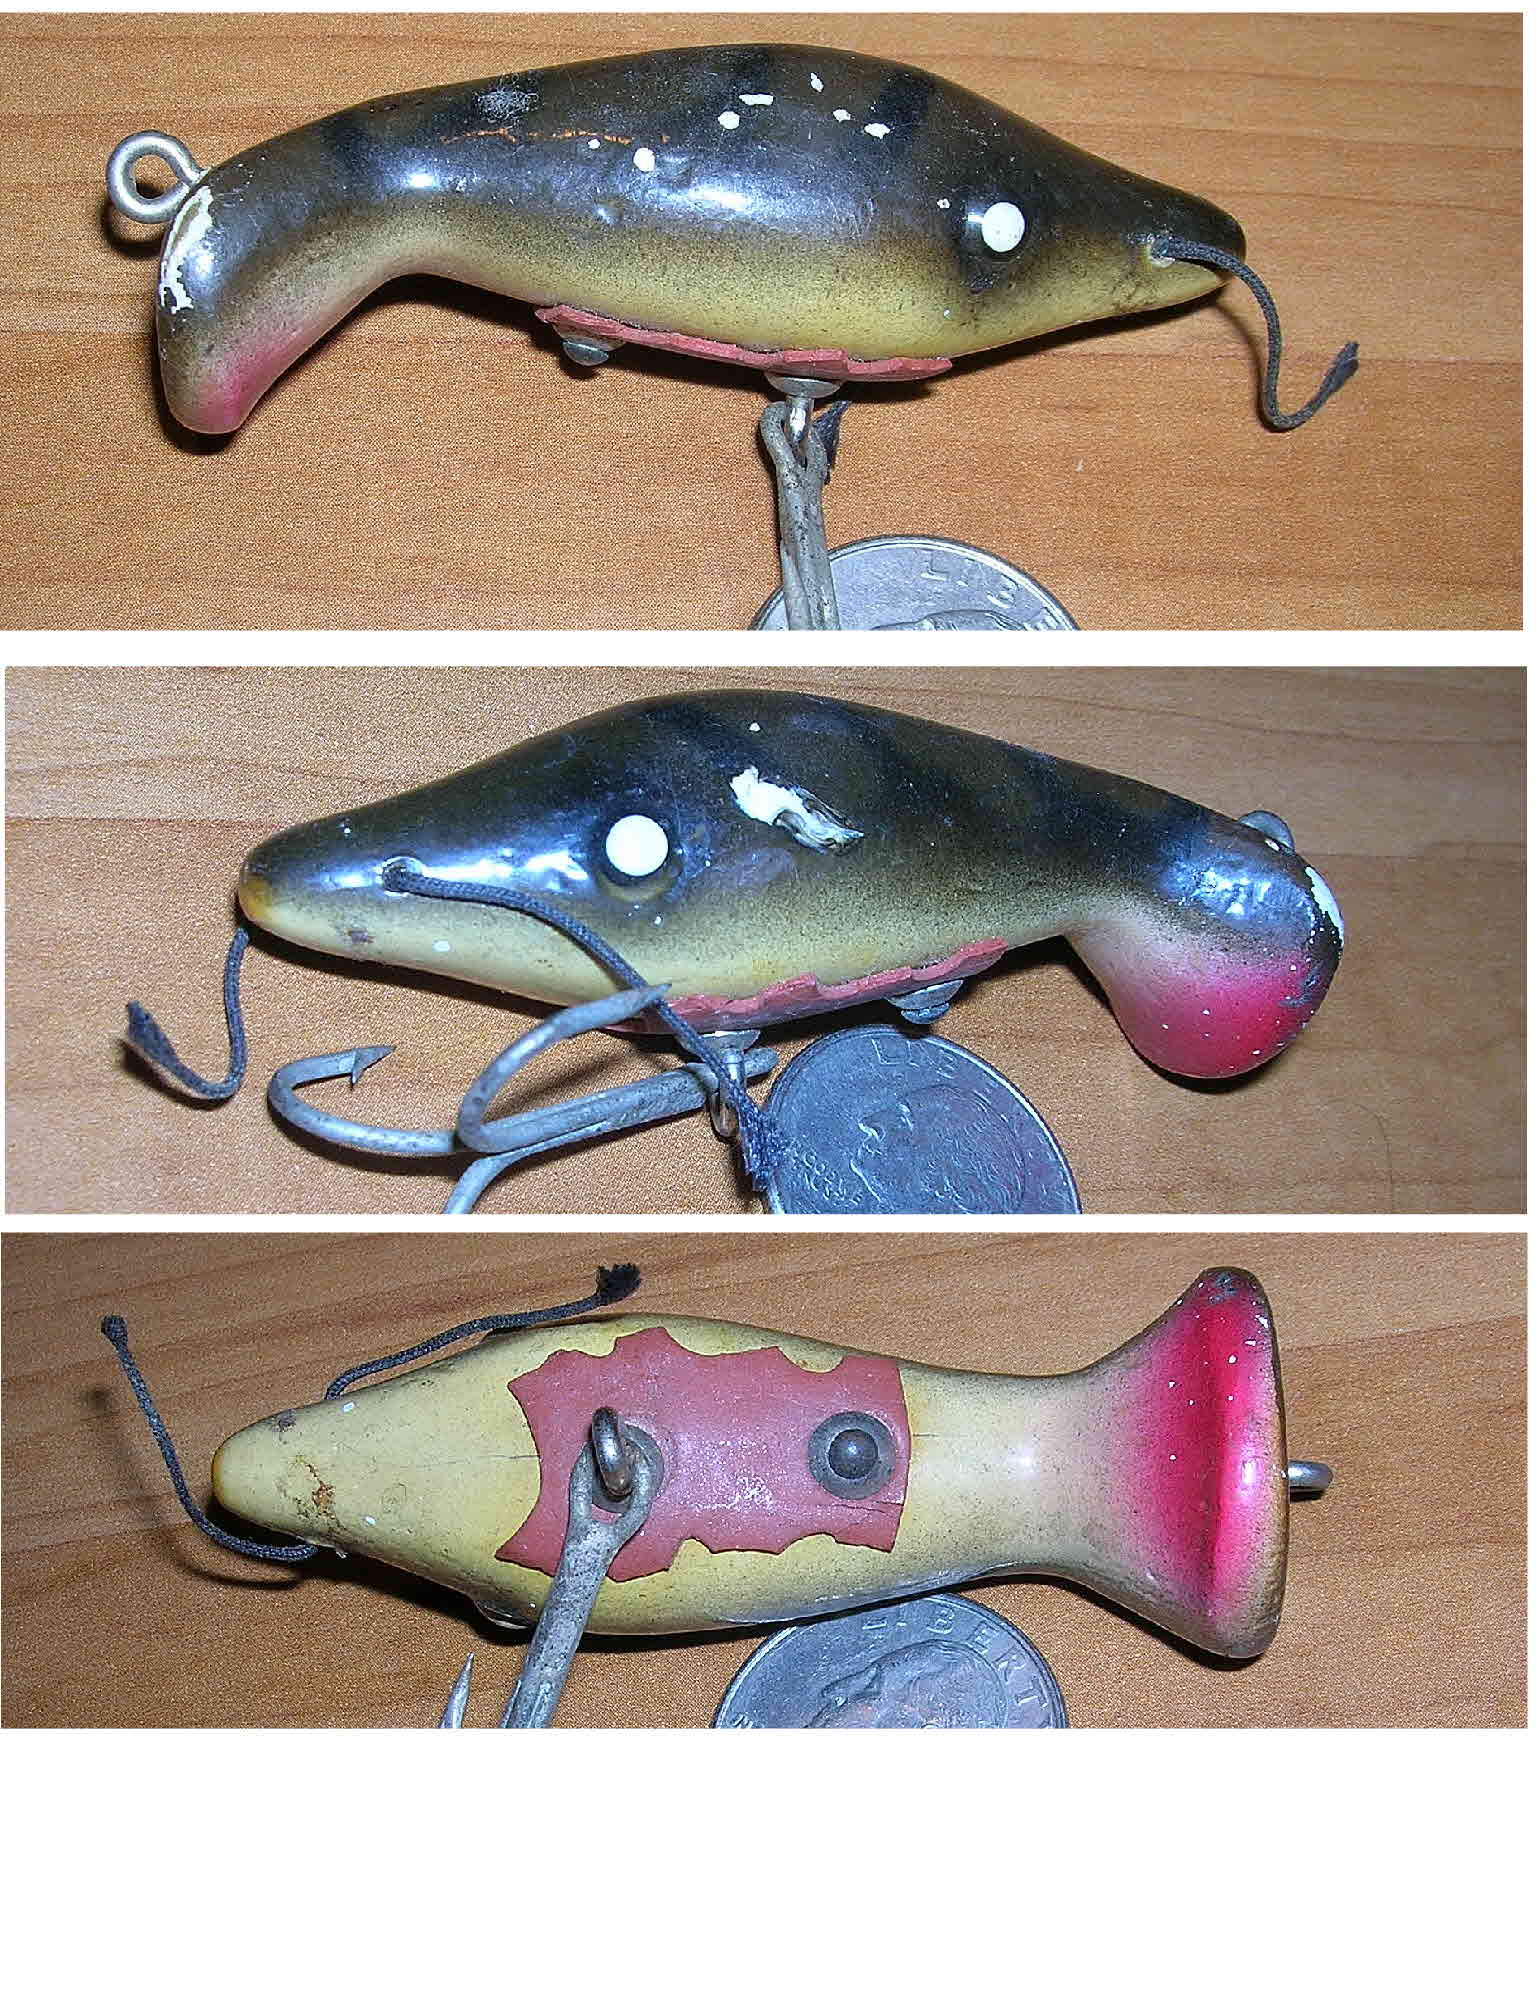 VINTAGE WOOD PAW PAW TROUT FISHING LURE 4 1/2 